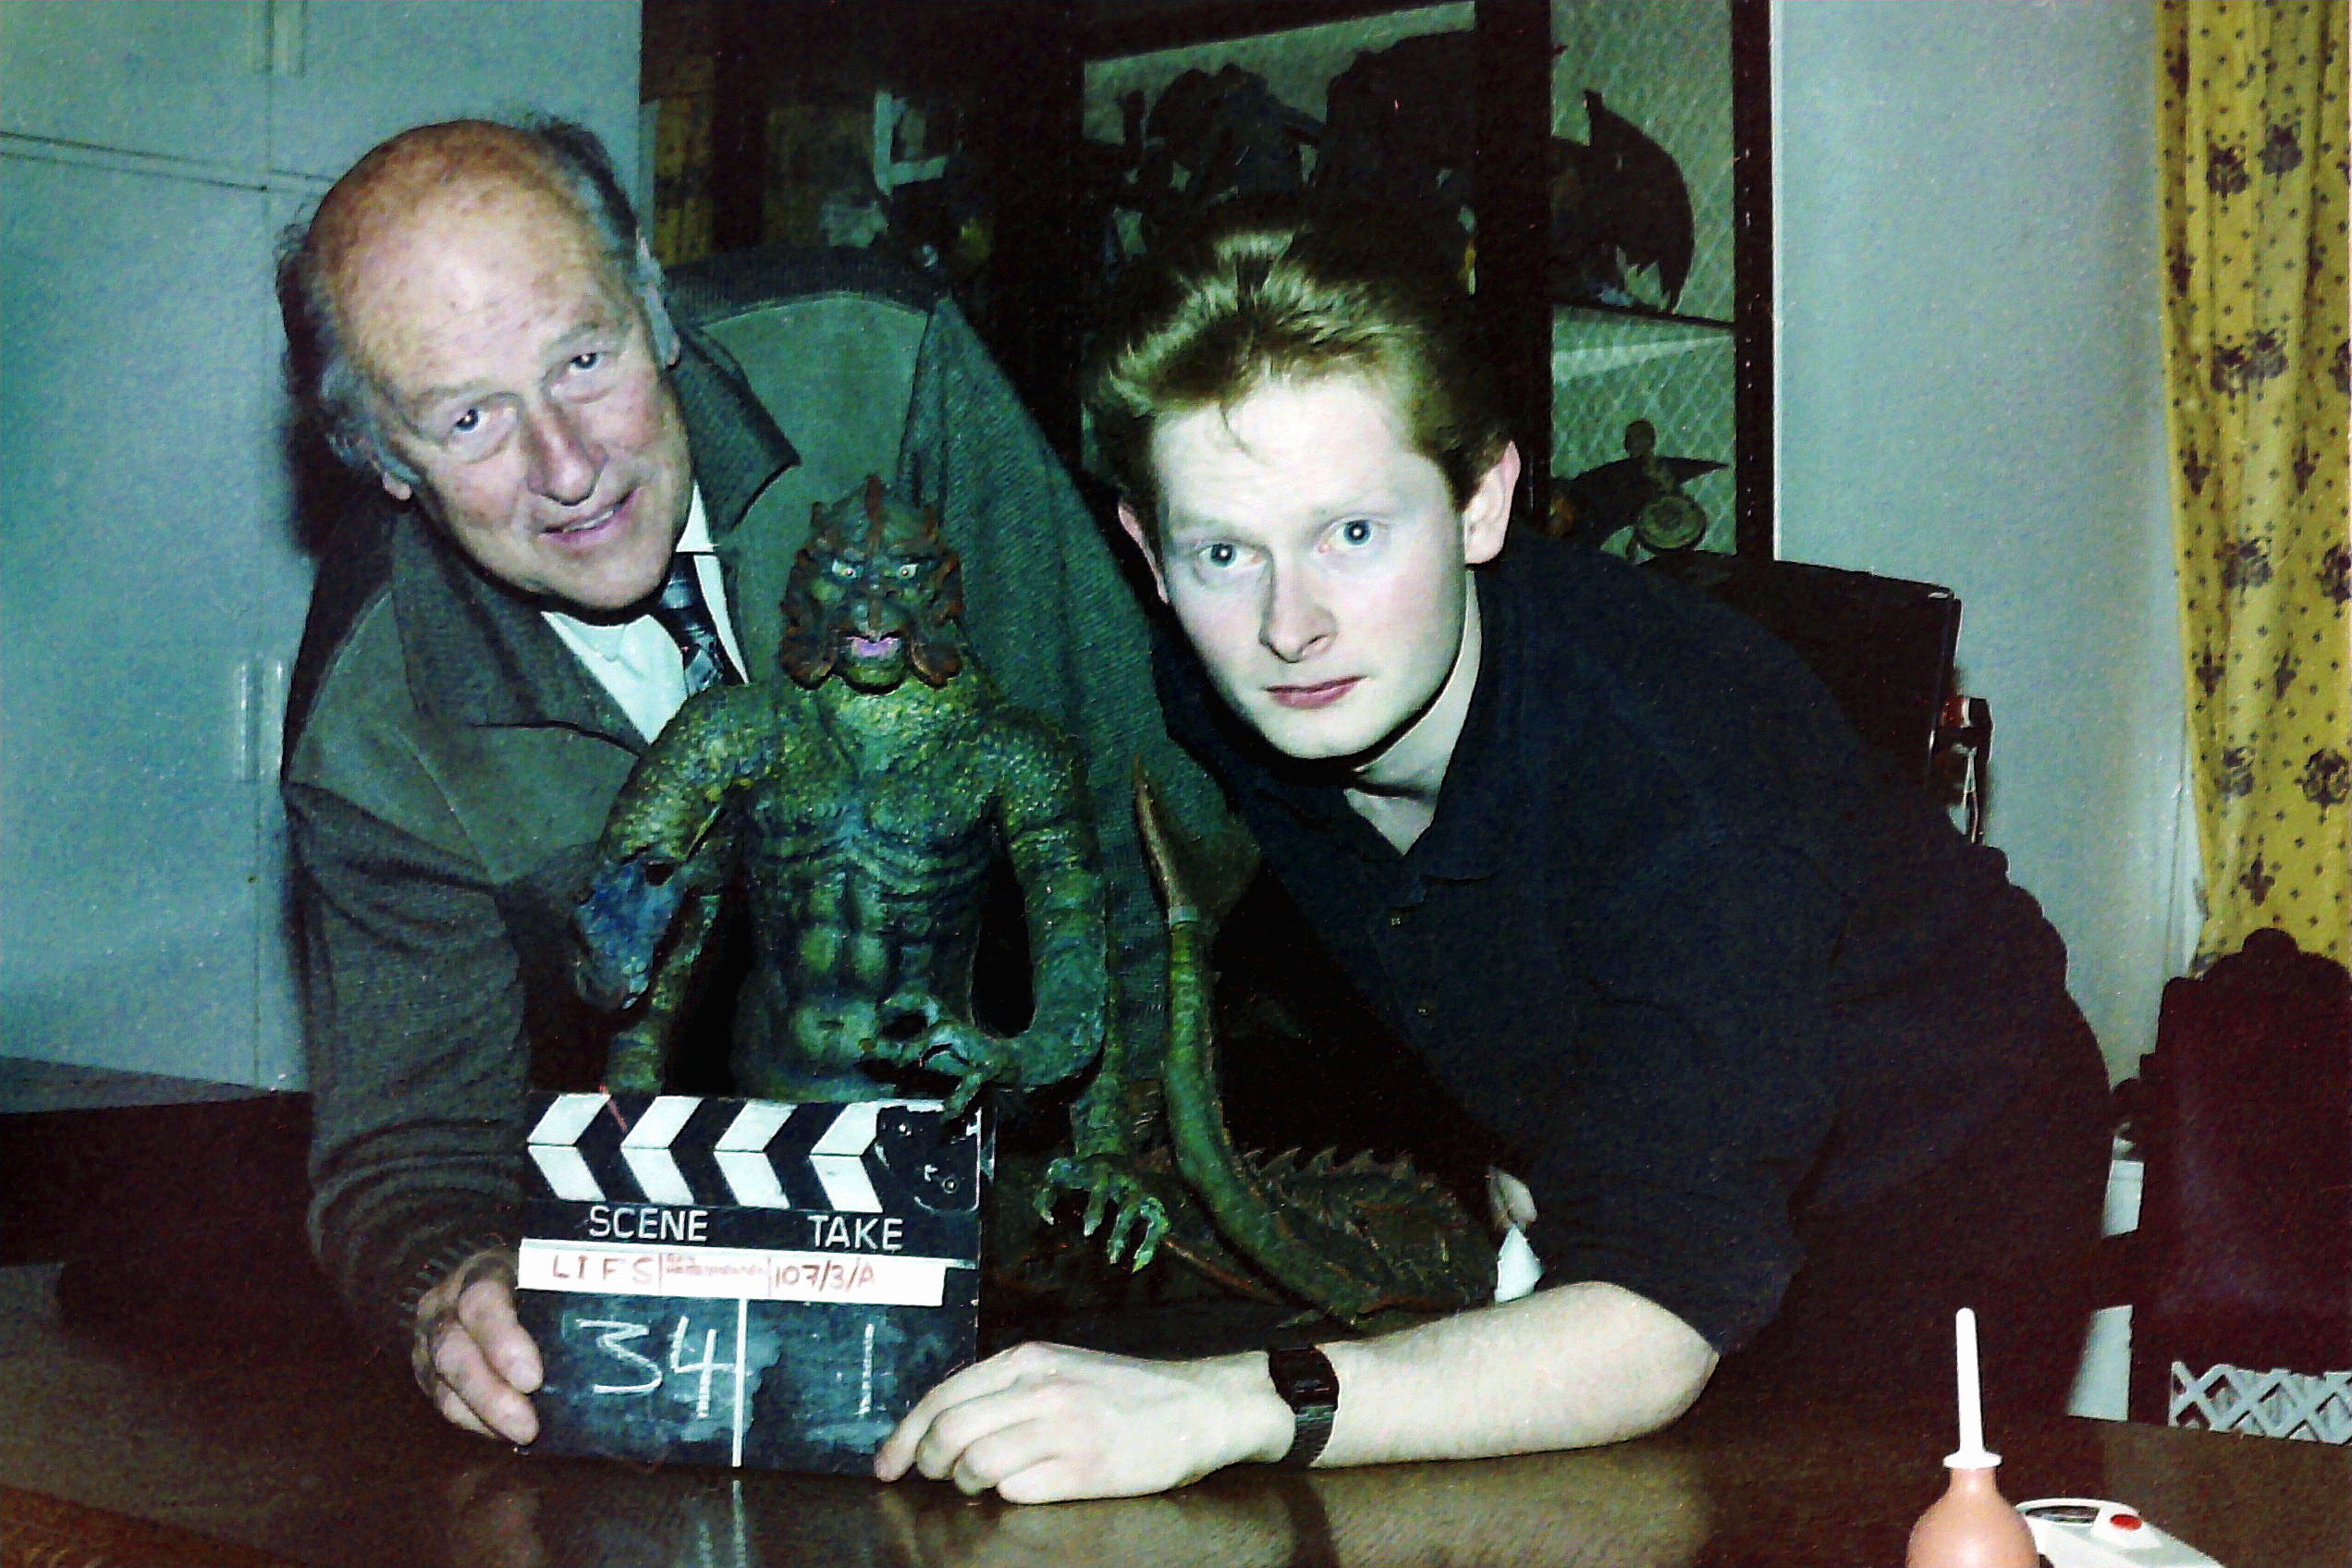 Taken with Ray at his house in London with film-maker John Walsh. Posing with the original Kraken from Clash of the Titans.